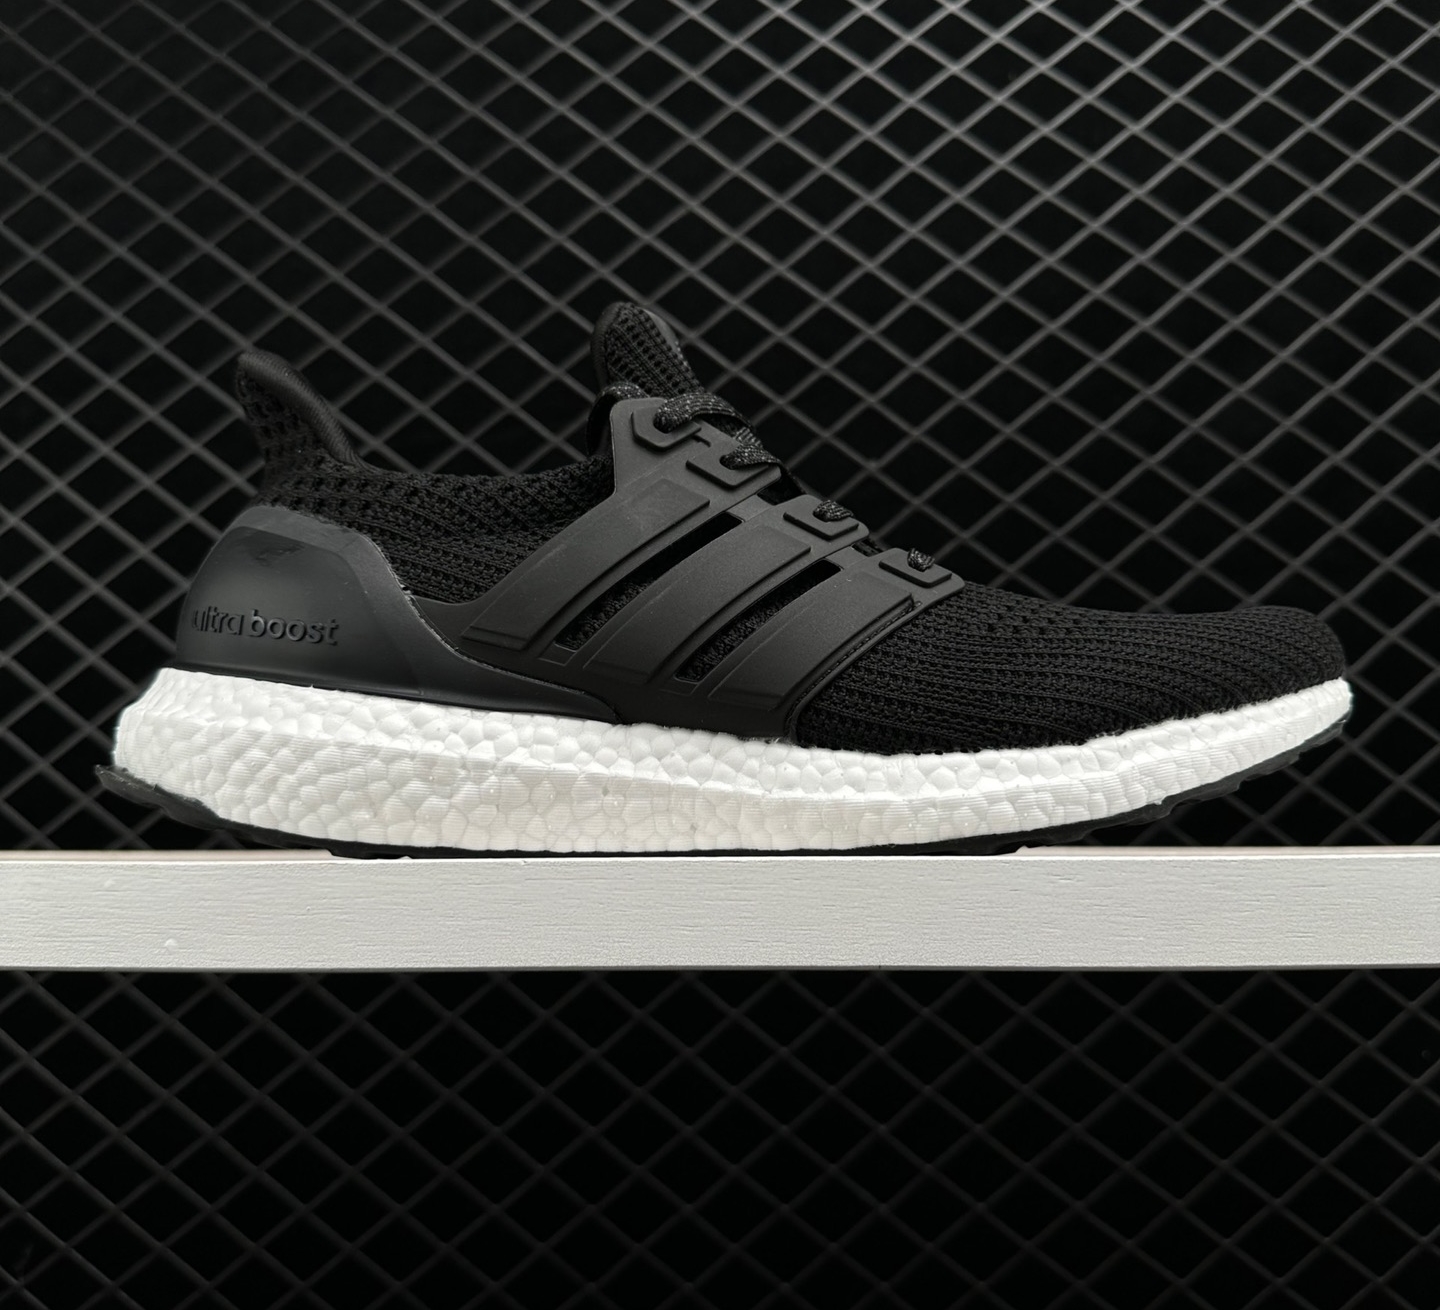 Adidas UltraBoost 4.0 'Core Black' BB6166 - Stylish and Comfortable Sneakers